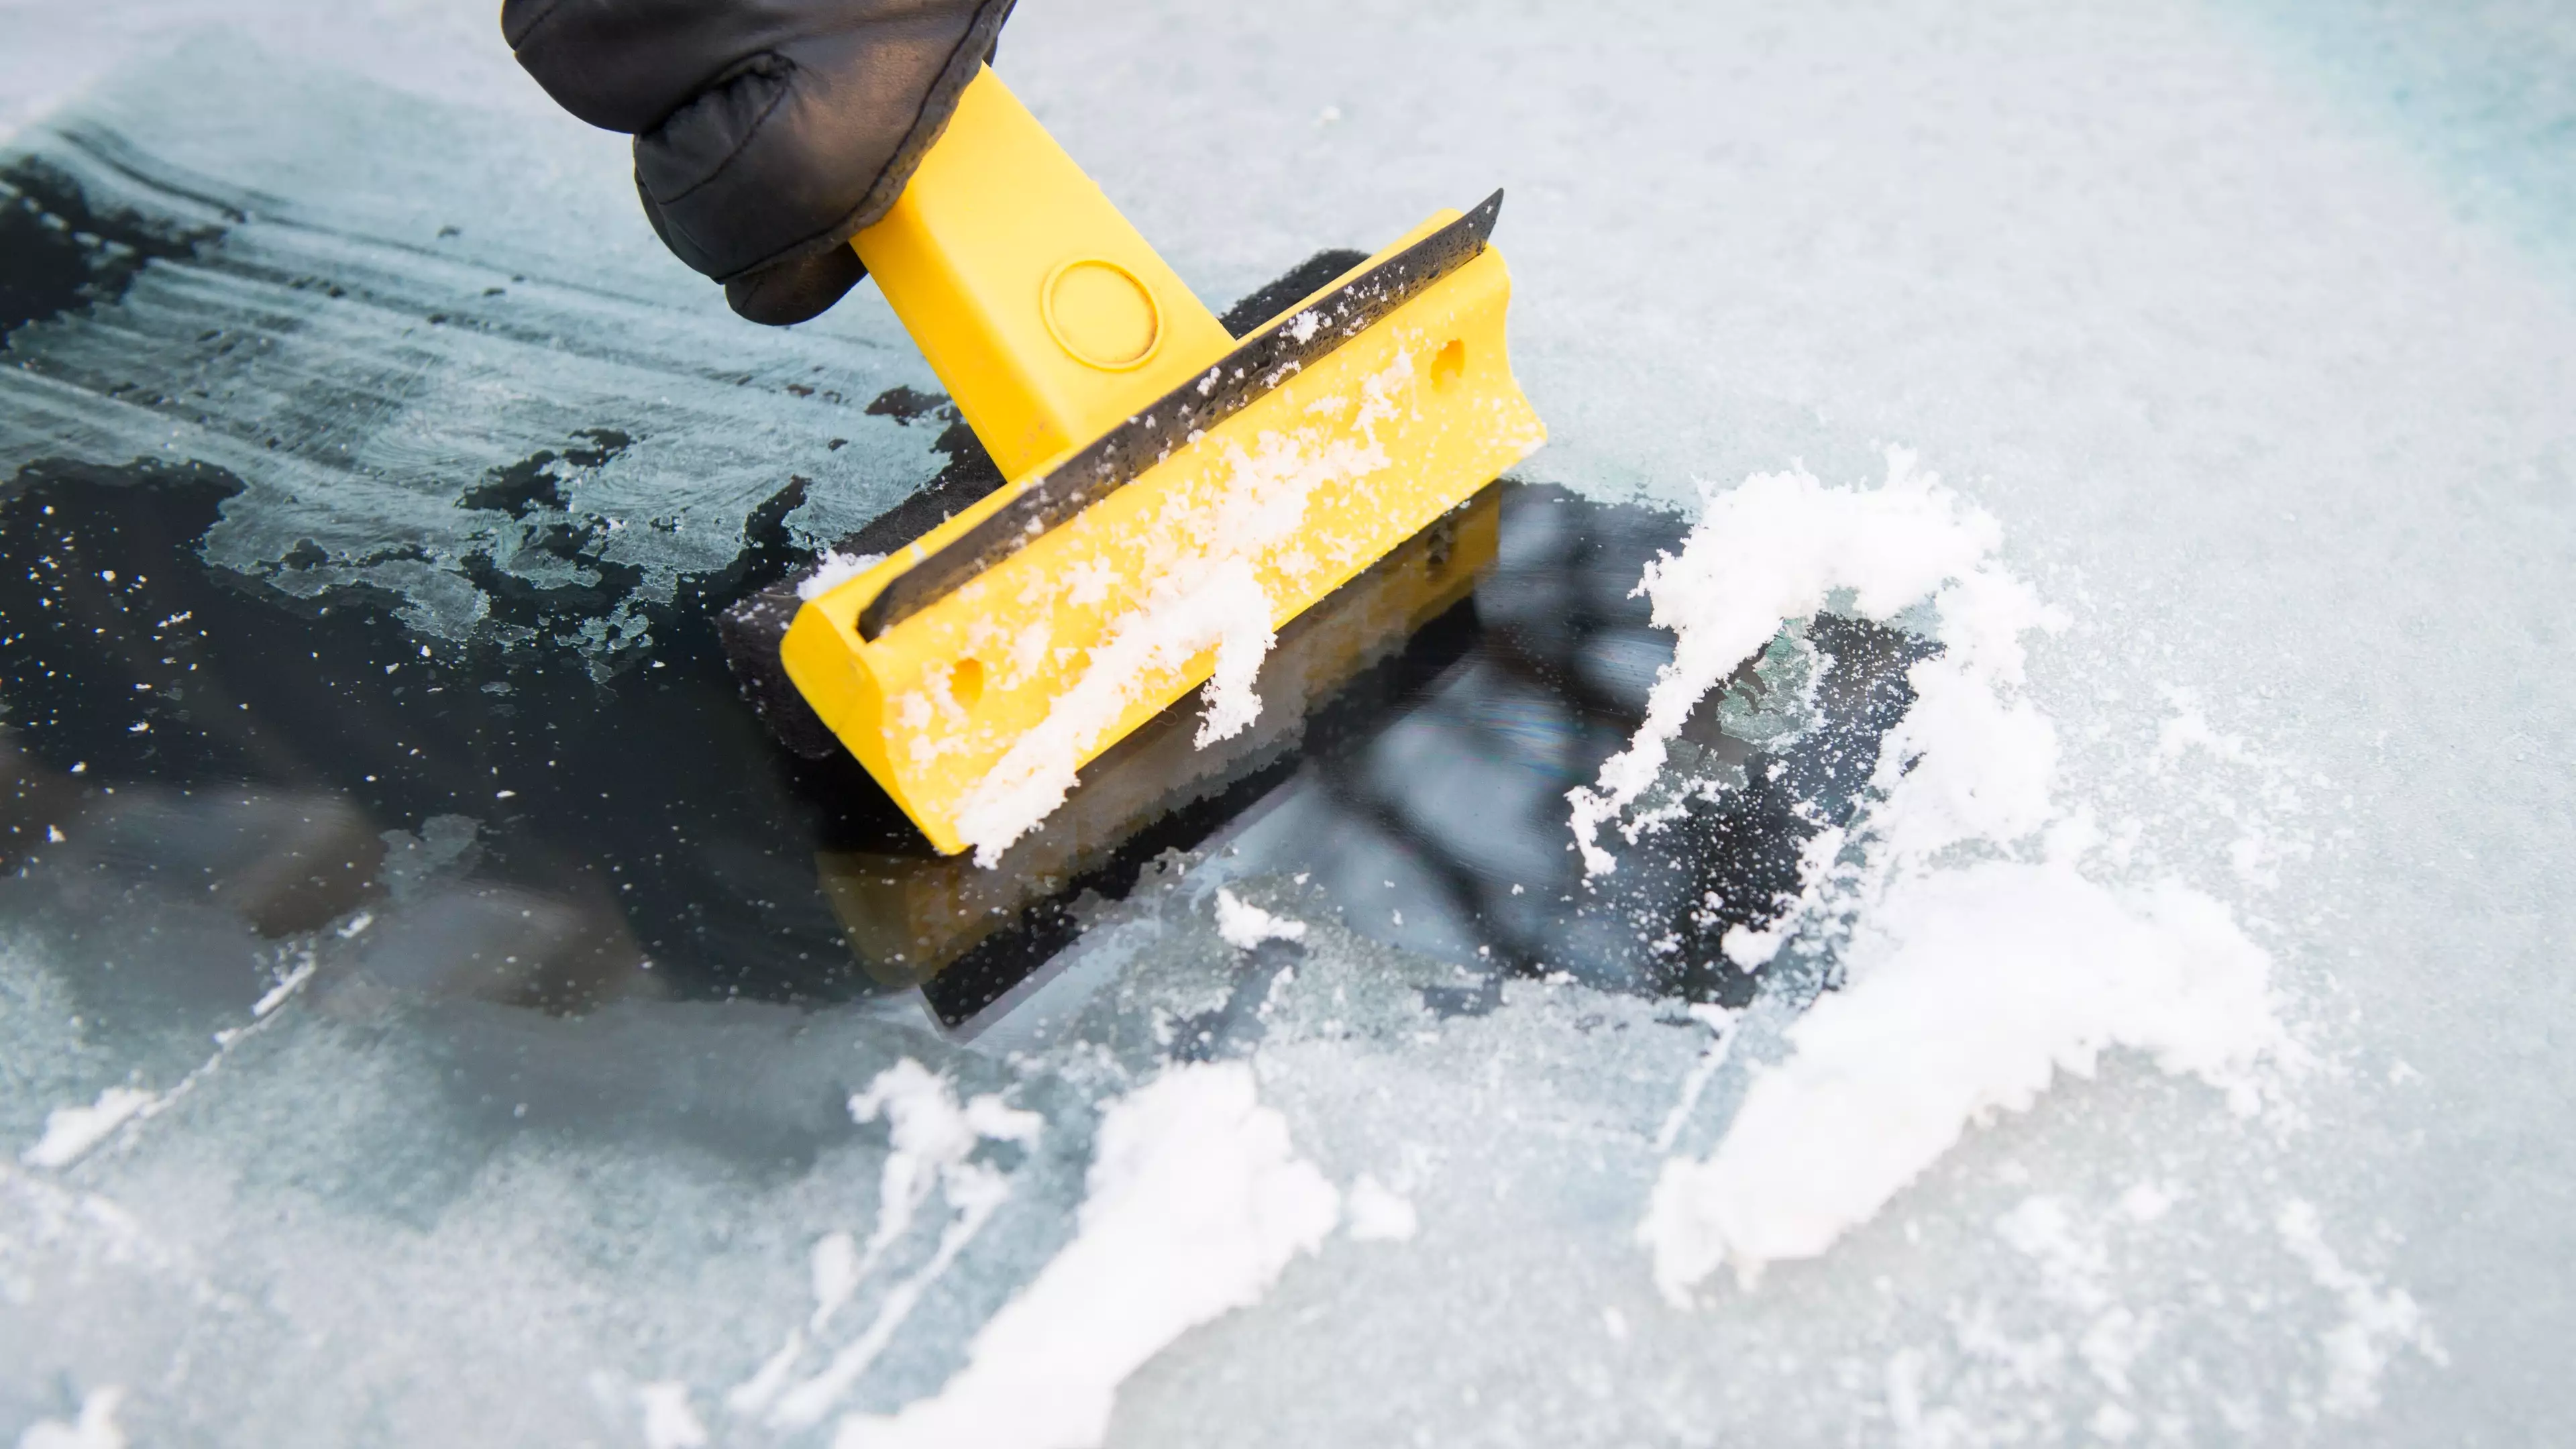 This Hack To De-Ice Your Car Is A Game-Changer